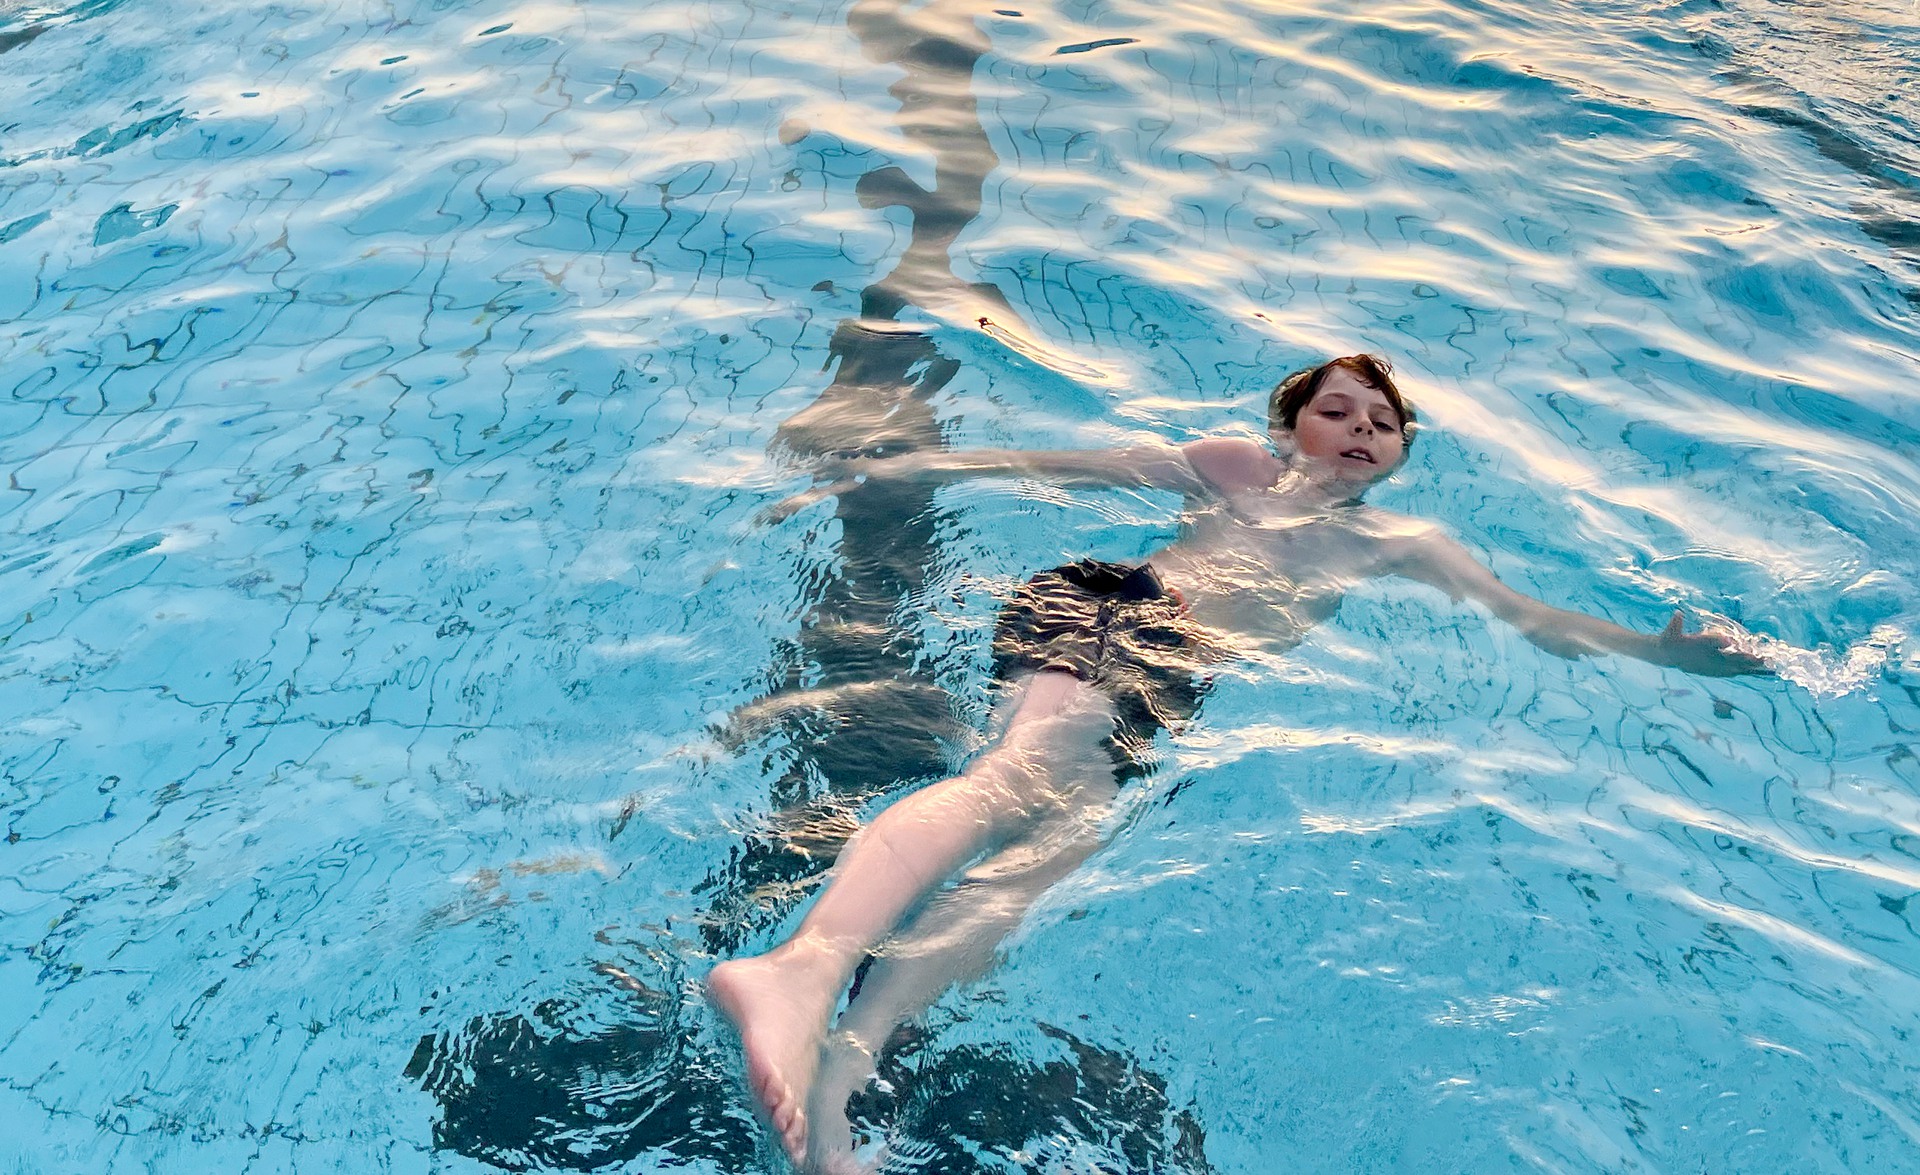 School kid boy splashing in an outdoor swimming pool on warm summer day. Happy healthy preteen child enjoying sunny weather in city public pool. Kids activity outdoors with water